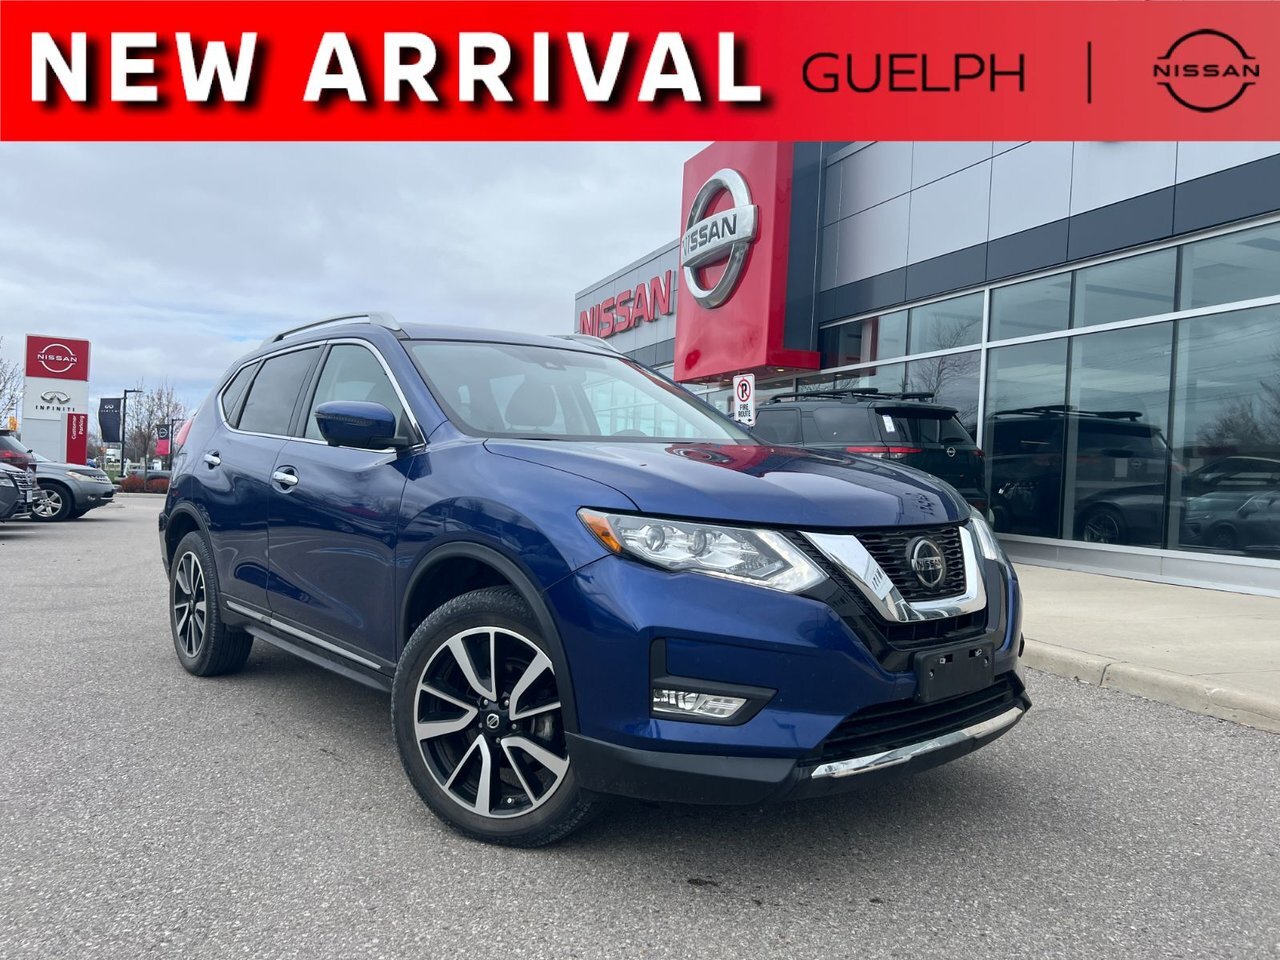 2020 Nissan Rogue SL AWD | CLEAN CARFAX | PANO ROOF | LOW KM